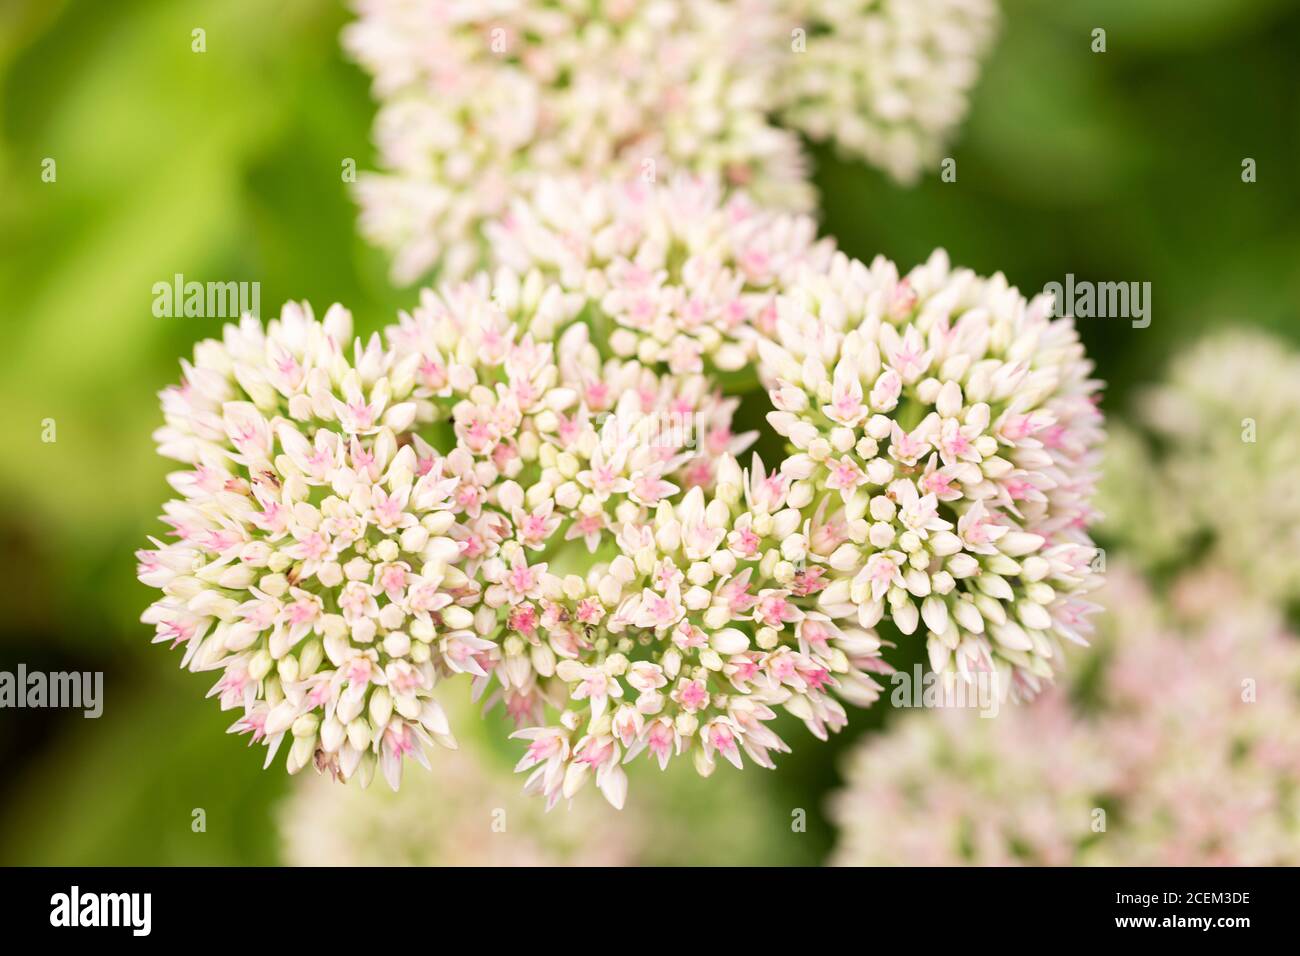 Orpine (Sedum telephium) also known as livelong, harping johnny, live-forever, or orphan john, a succulent perennial in family Crassulaceae. Stock Photo